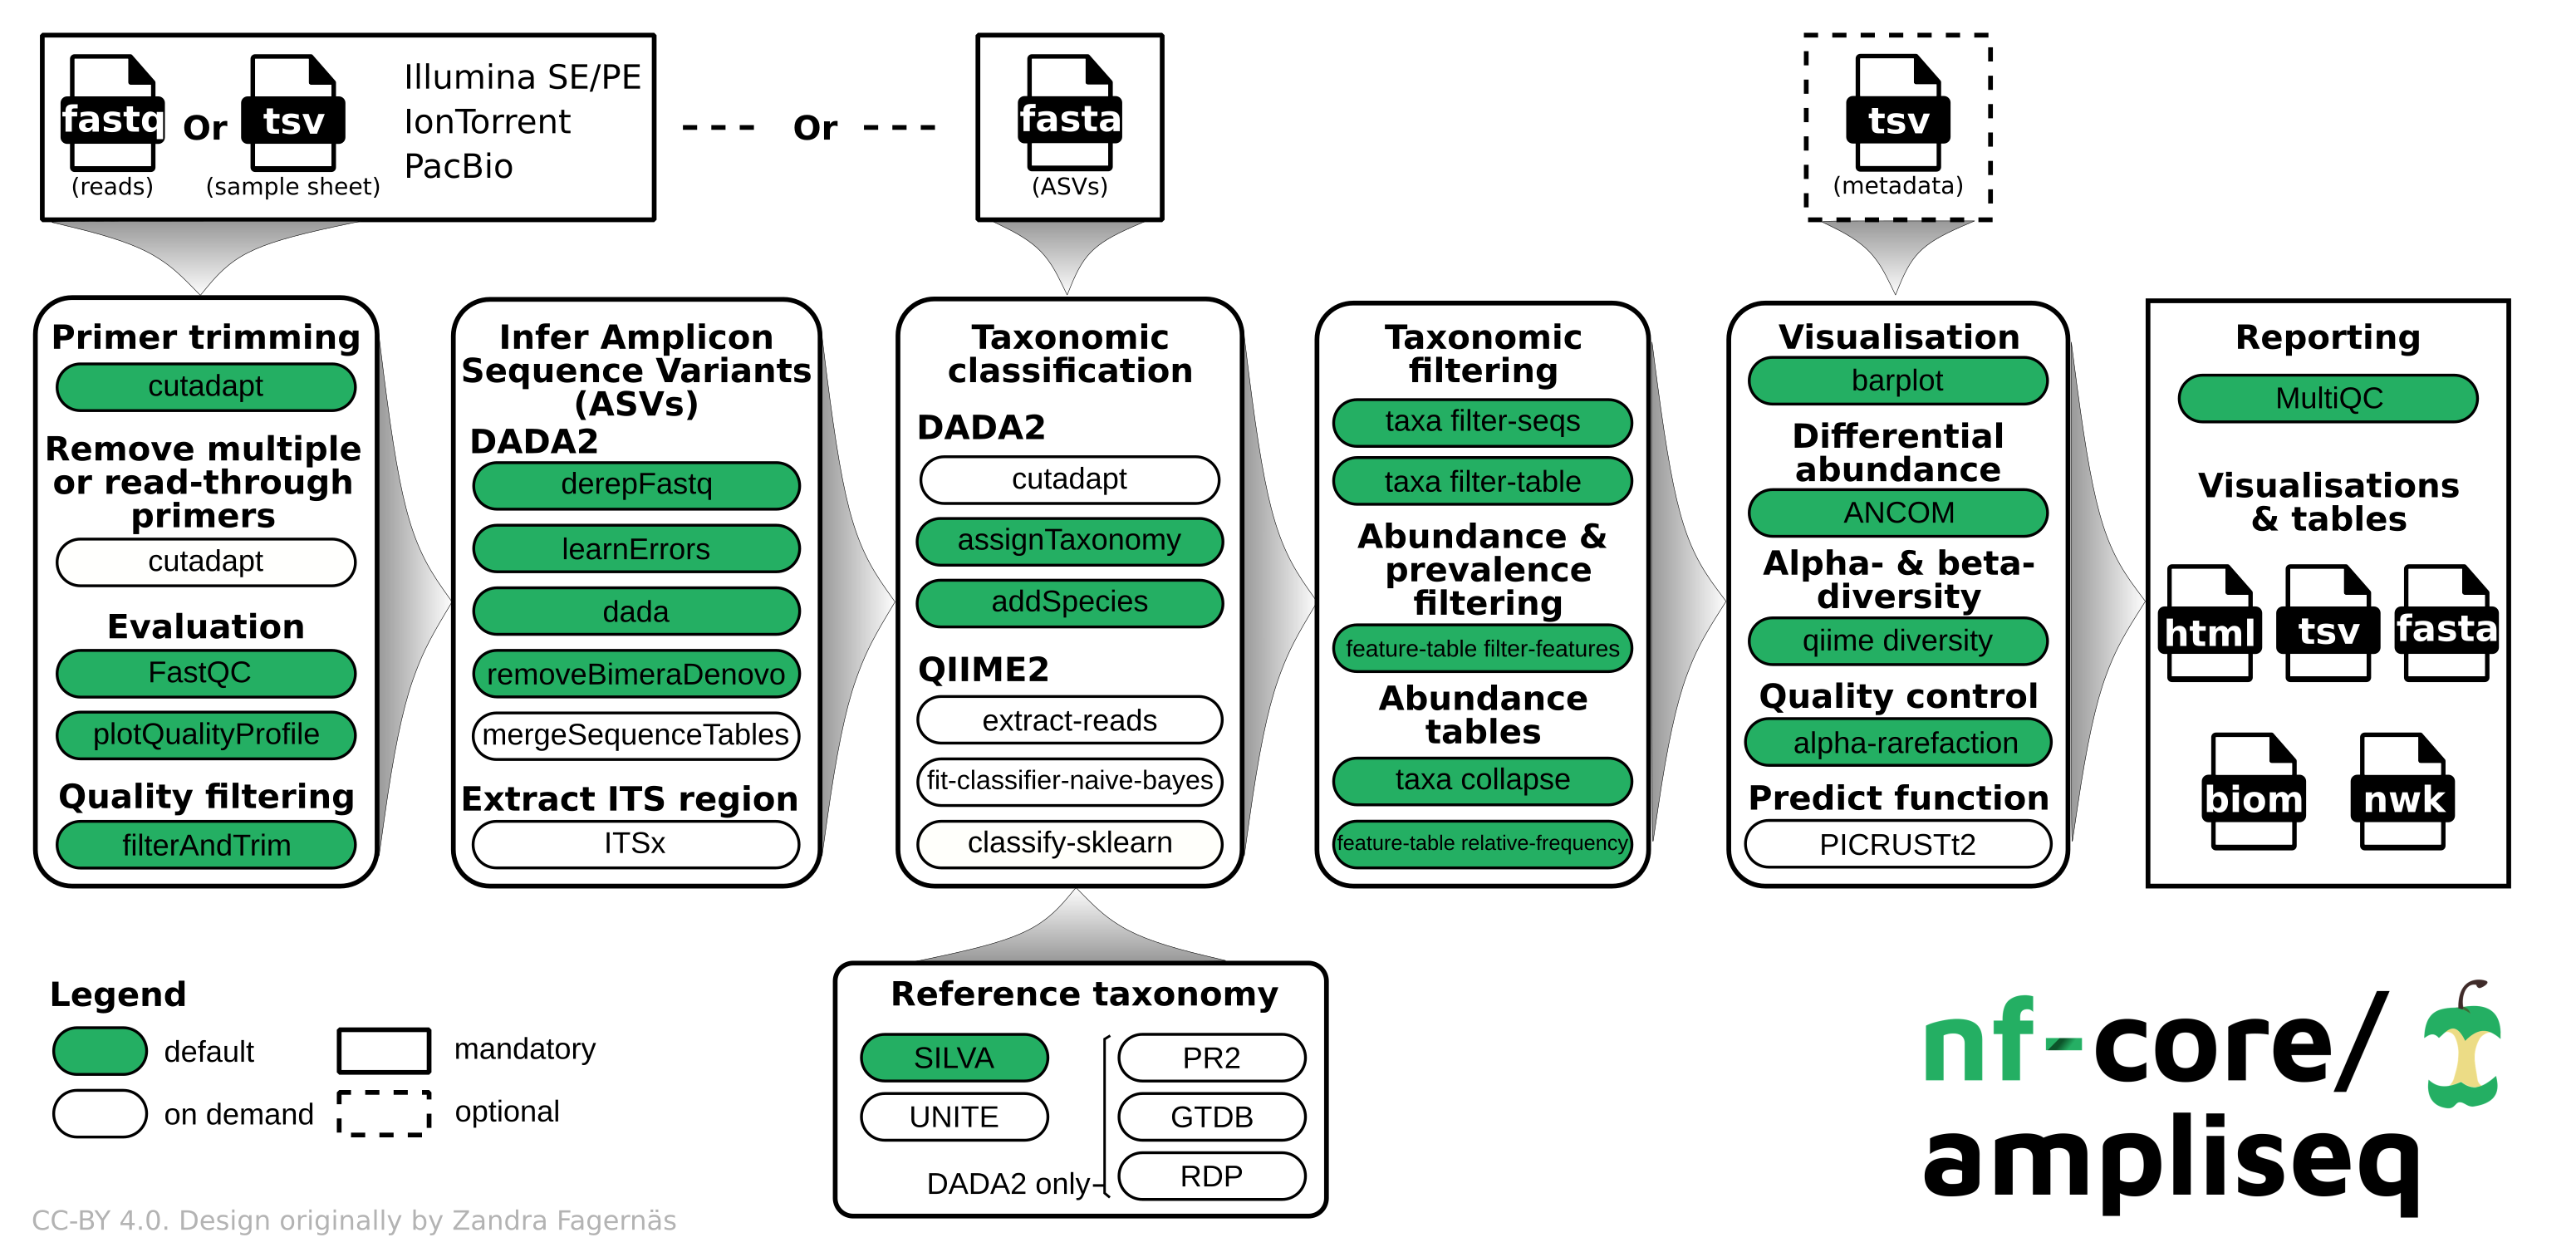 nf-core/ampliseq workflow overview